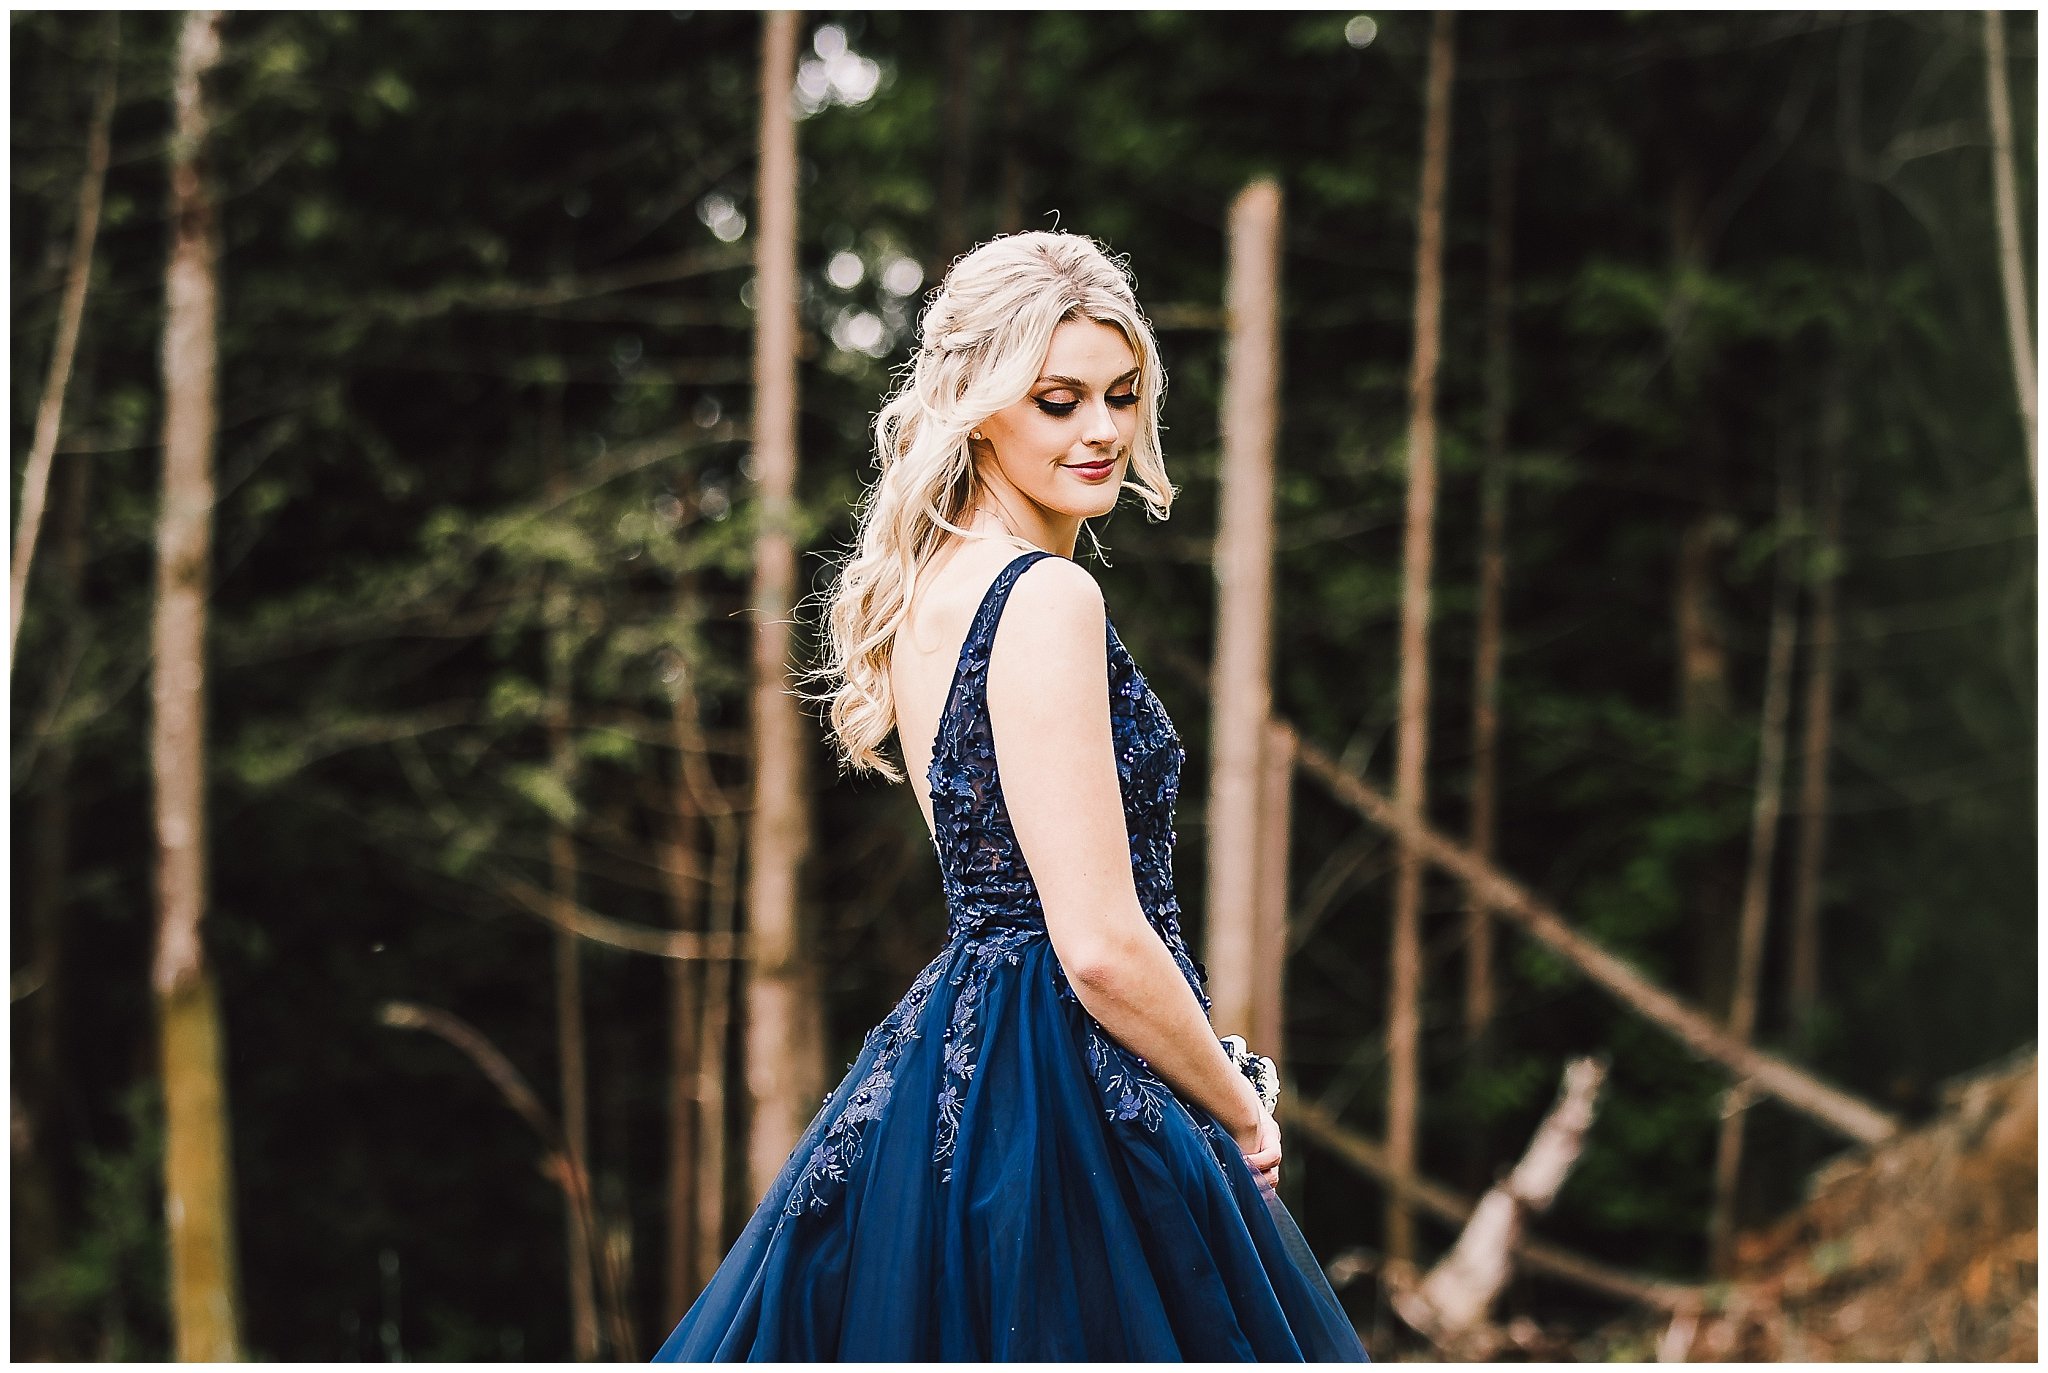 Best Prom Photographer in Chilliwack, BC